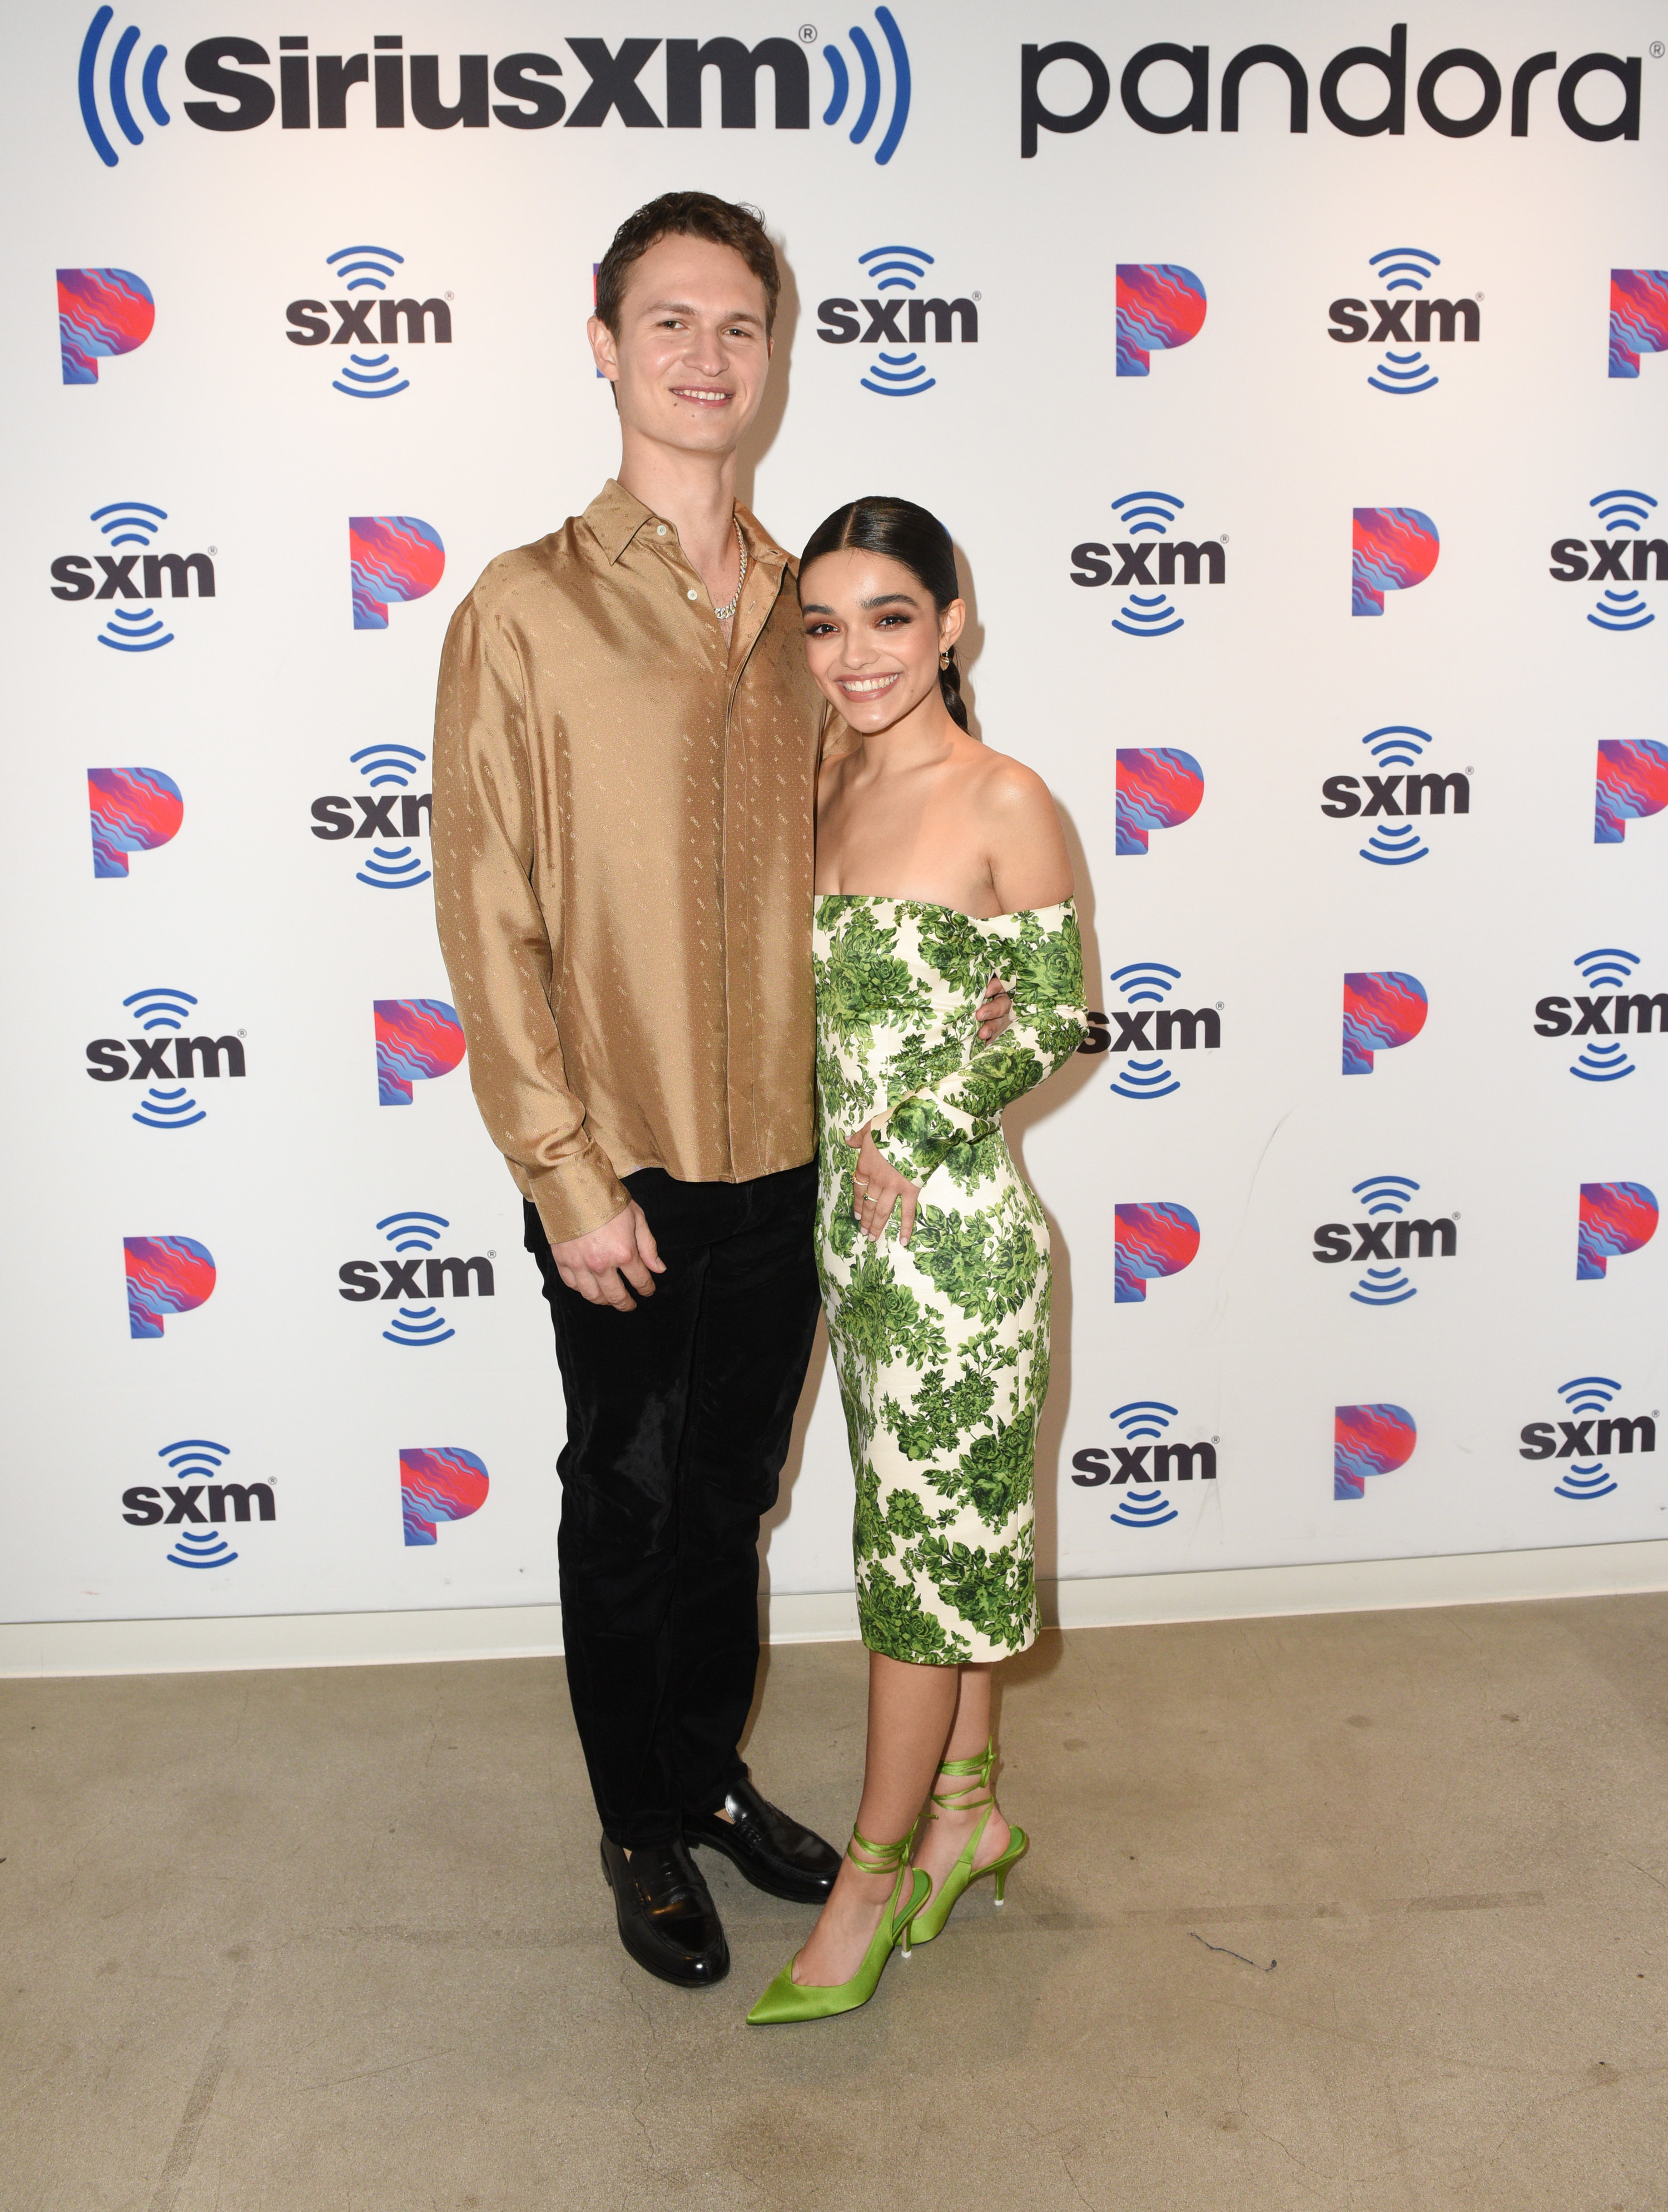 Ansel and Rachel posing together for photographers at an event